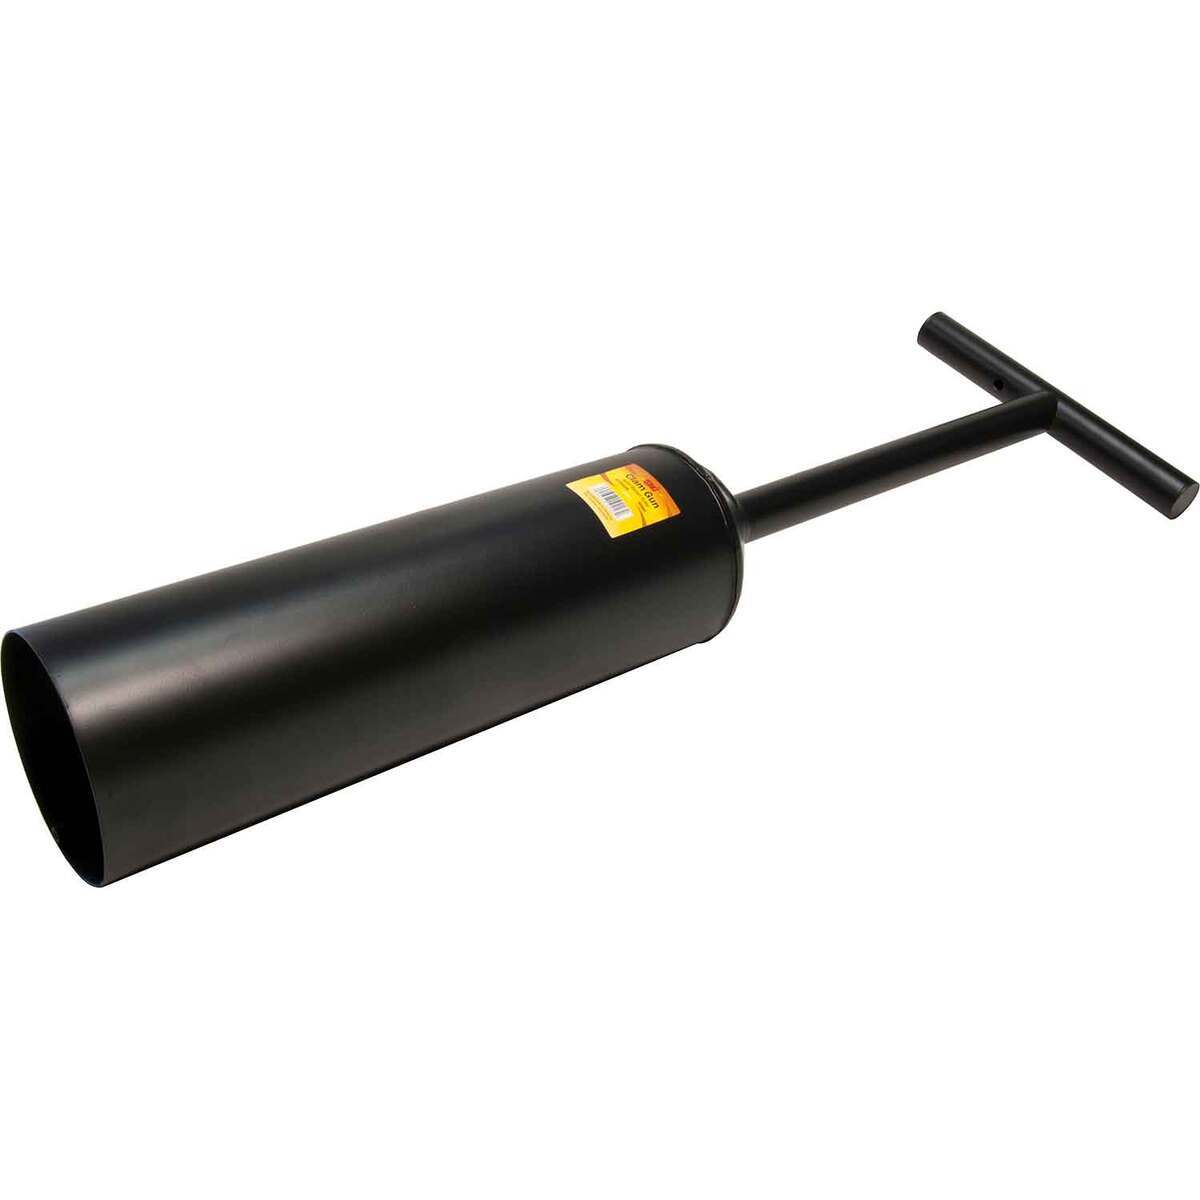 SMI Steel Clam Gun with Relief Tube - Black by Sportsman's Warehouse